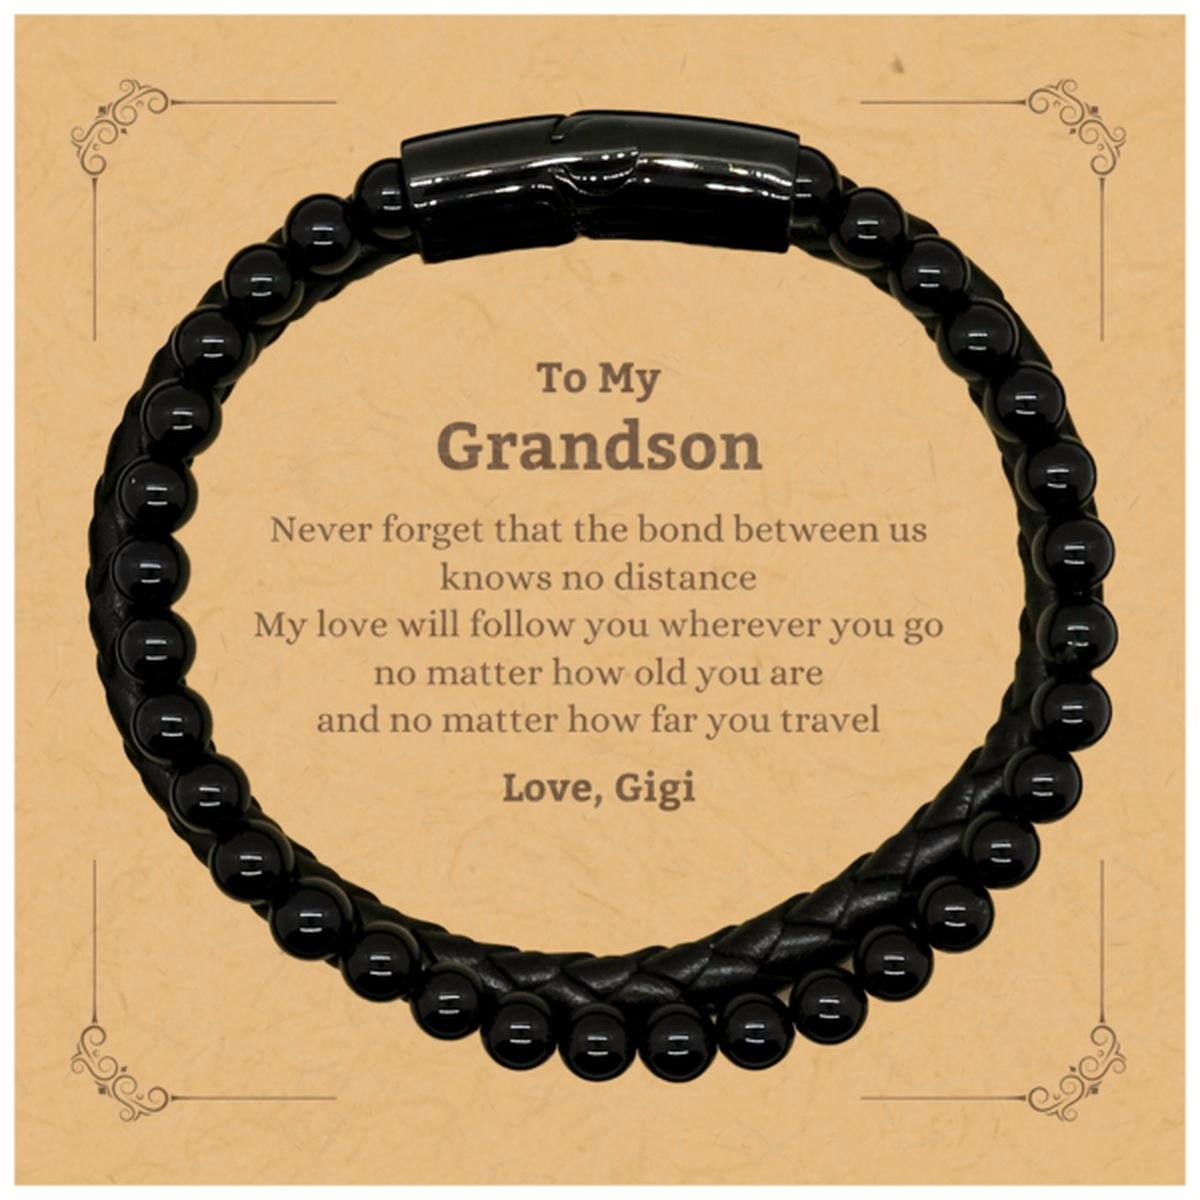 Grandson Birthday Gifts from Gigi, Adjustable Stone Leather Bracelets for Grandson Christmas Graduation Unique Gifts Grandson Never forget that the bond between us knows no distance. Love, Gigi